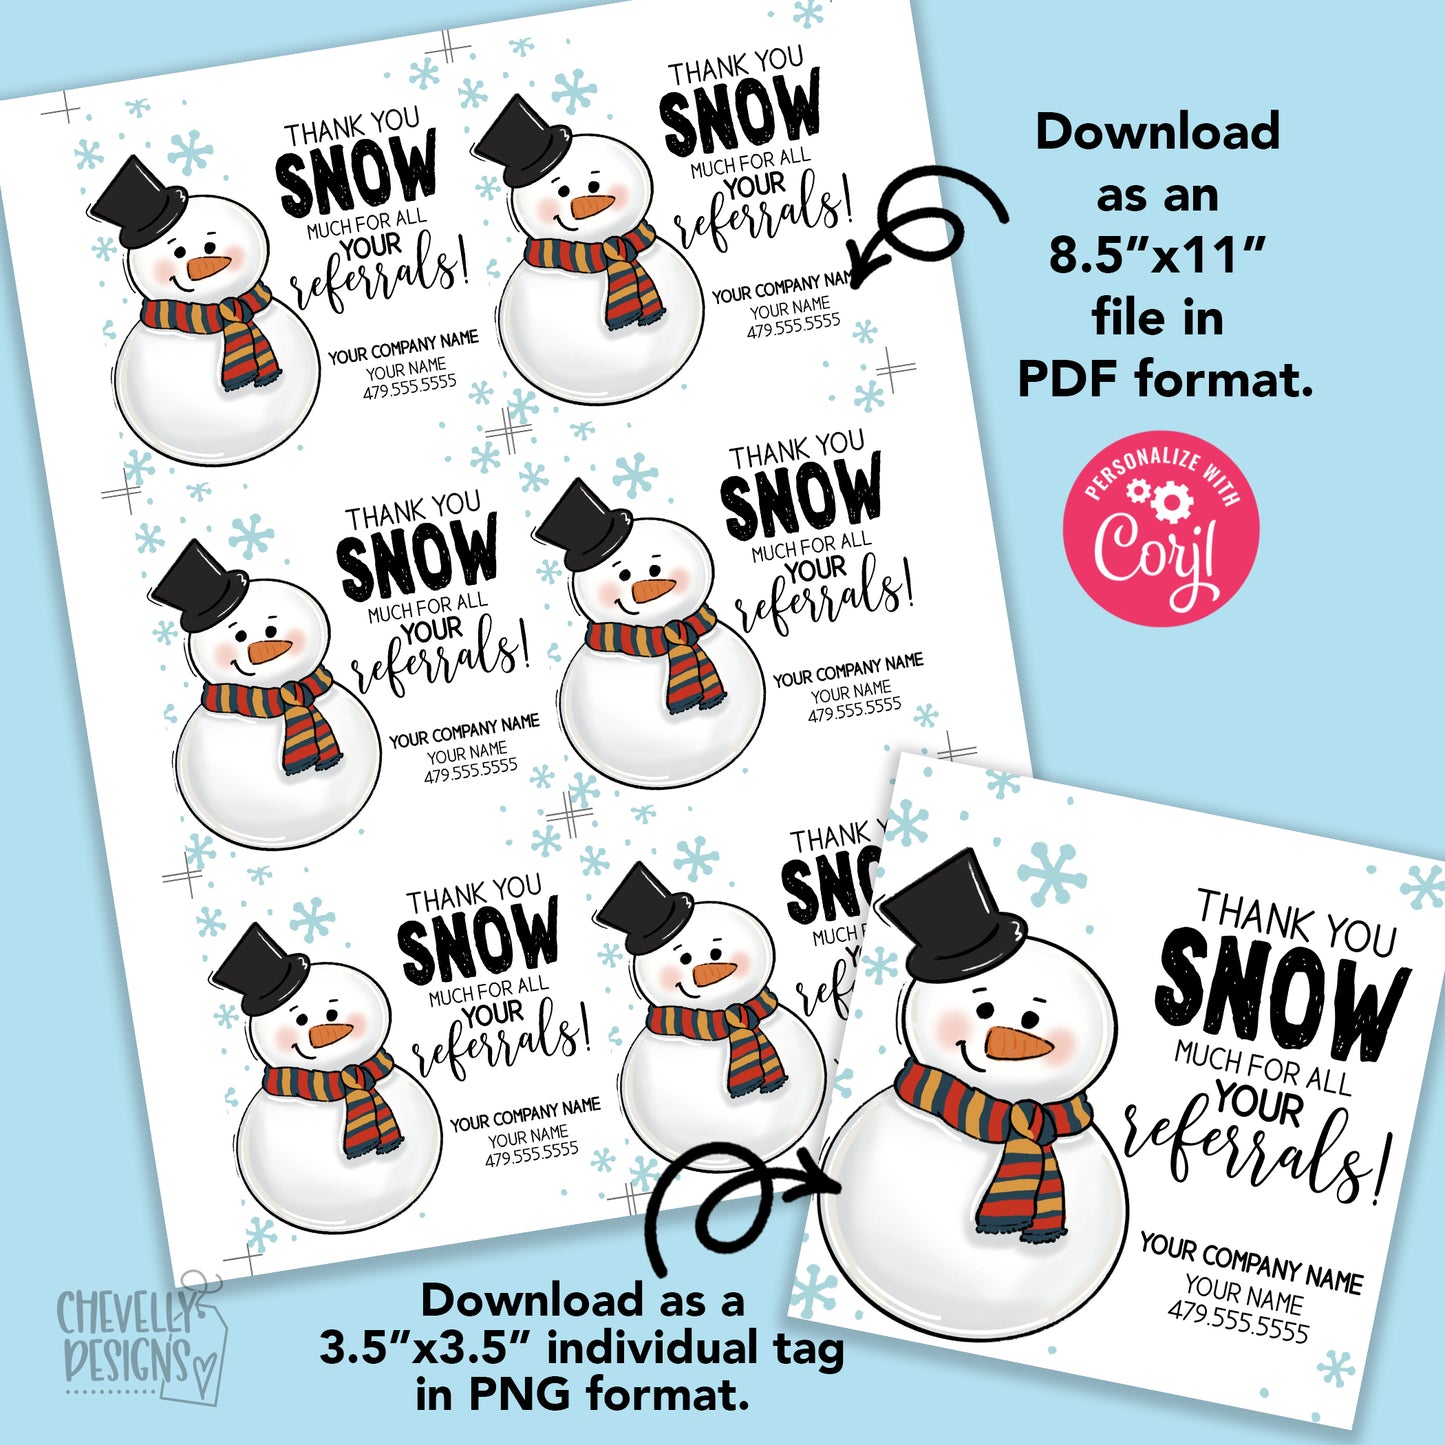 EDITABLE - Thank You Snow Much for All Your Referrals - Business Treat Gift Tags - Printable Digital File